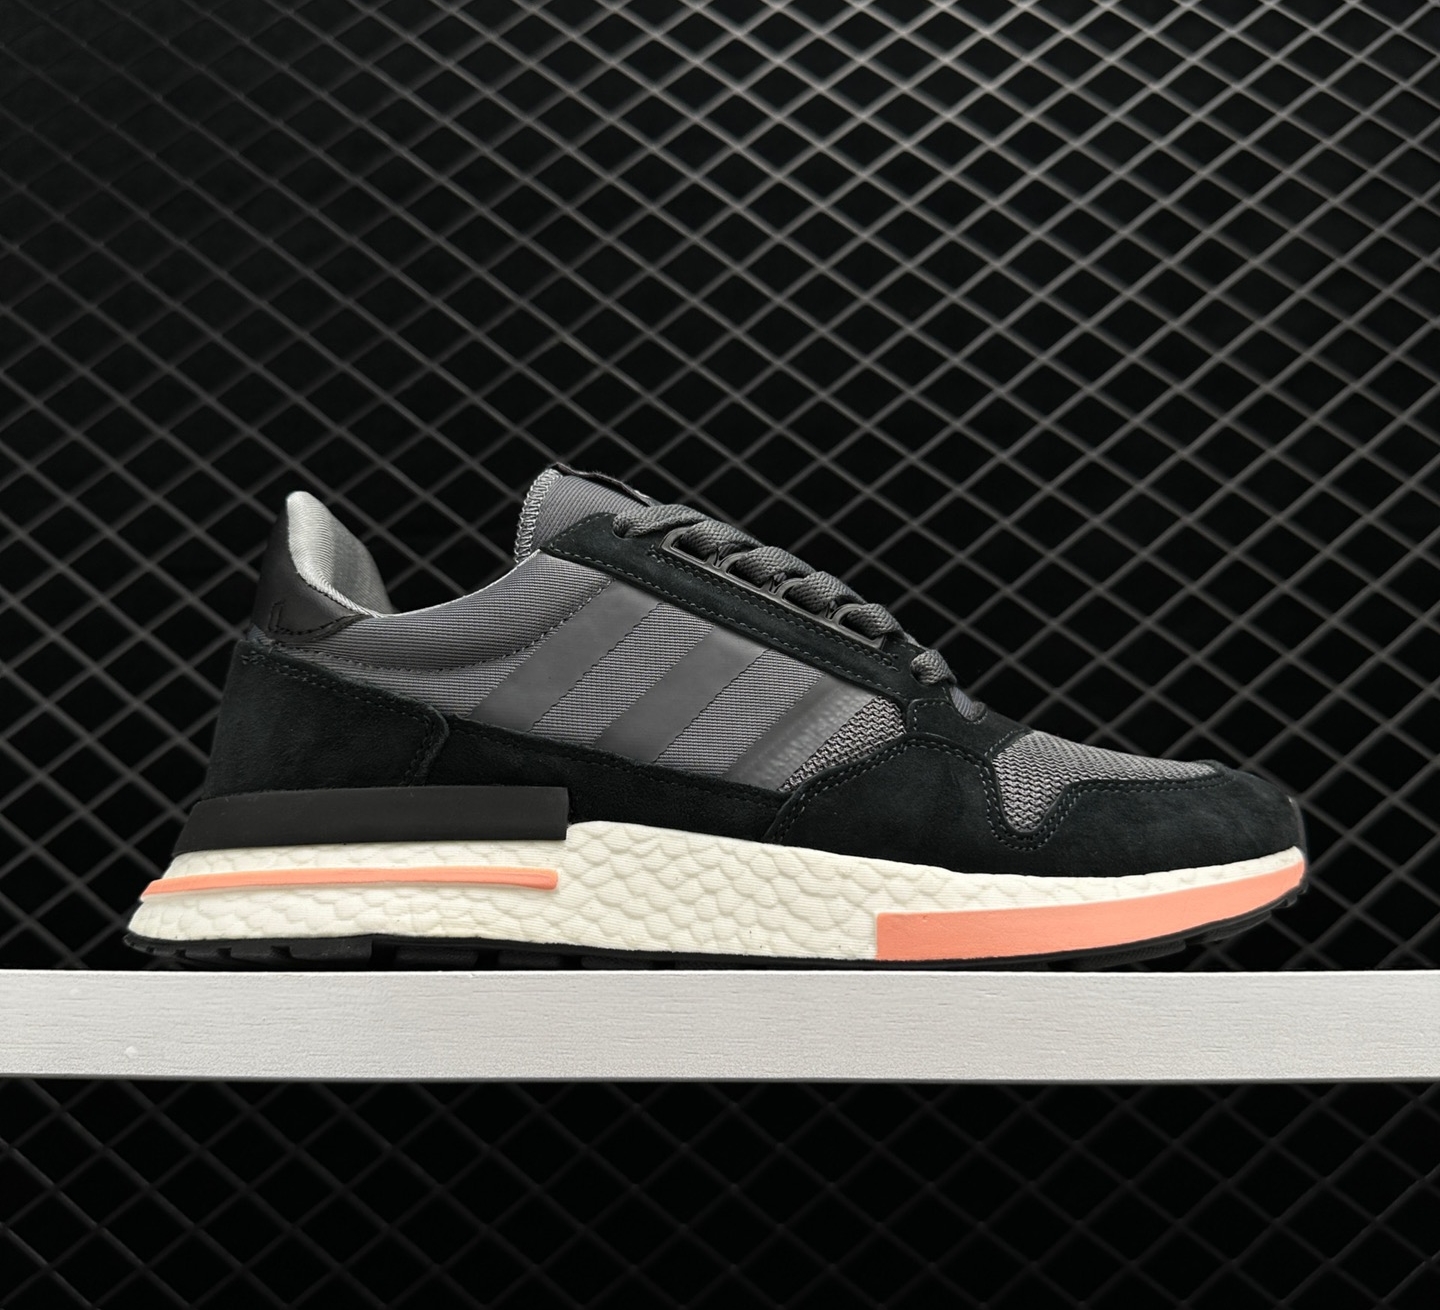 Adidas ZX 500 RM Gray White Pink B42217 | Stylish and Comfortable Sneakers